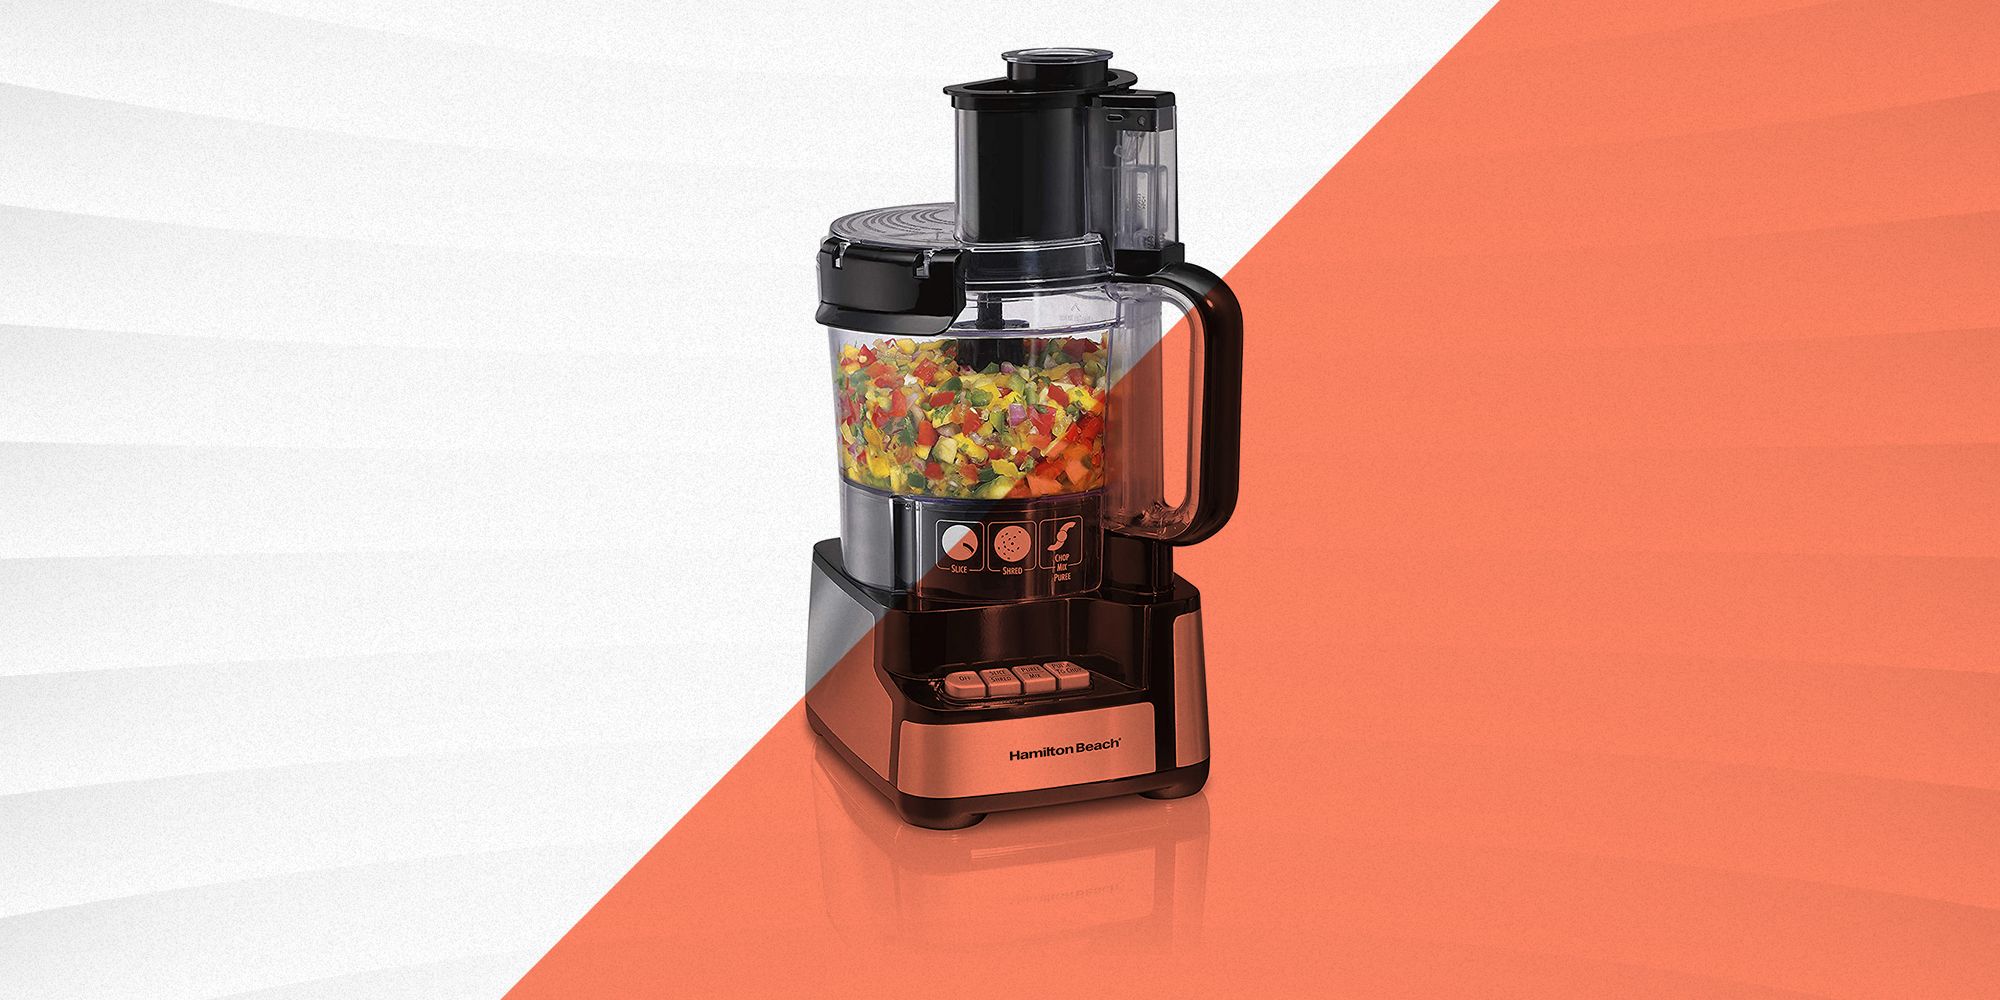 Food chopper or food processor? Pick the right tool for each task